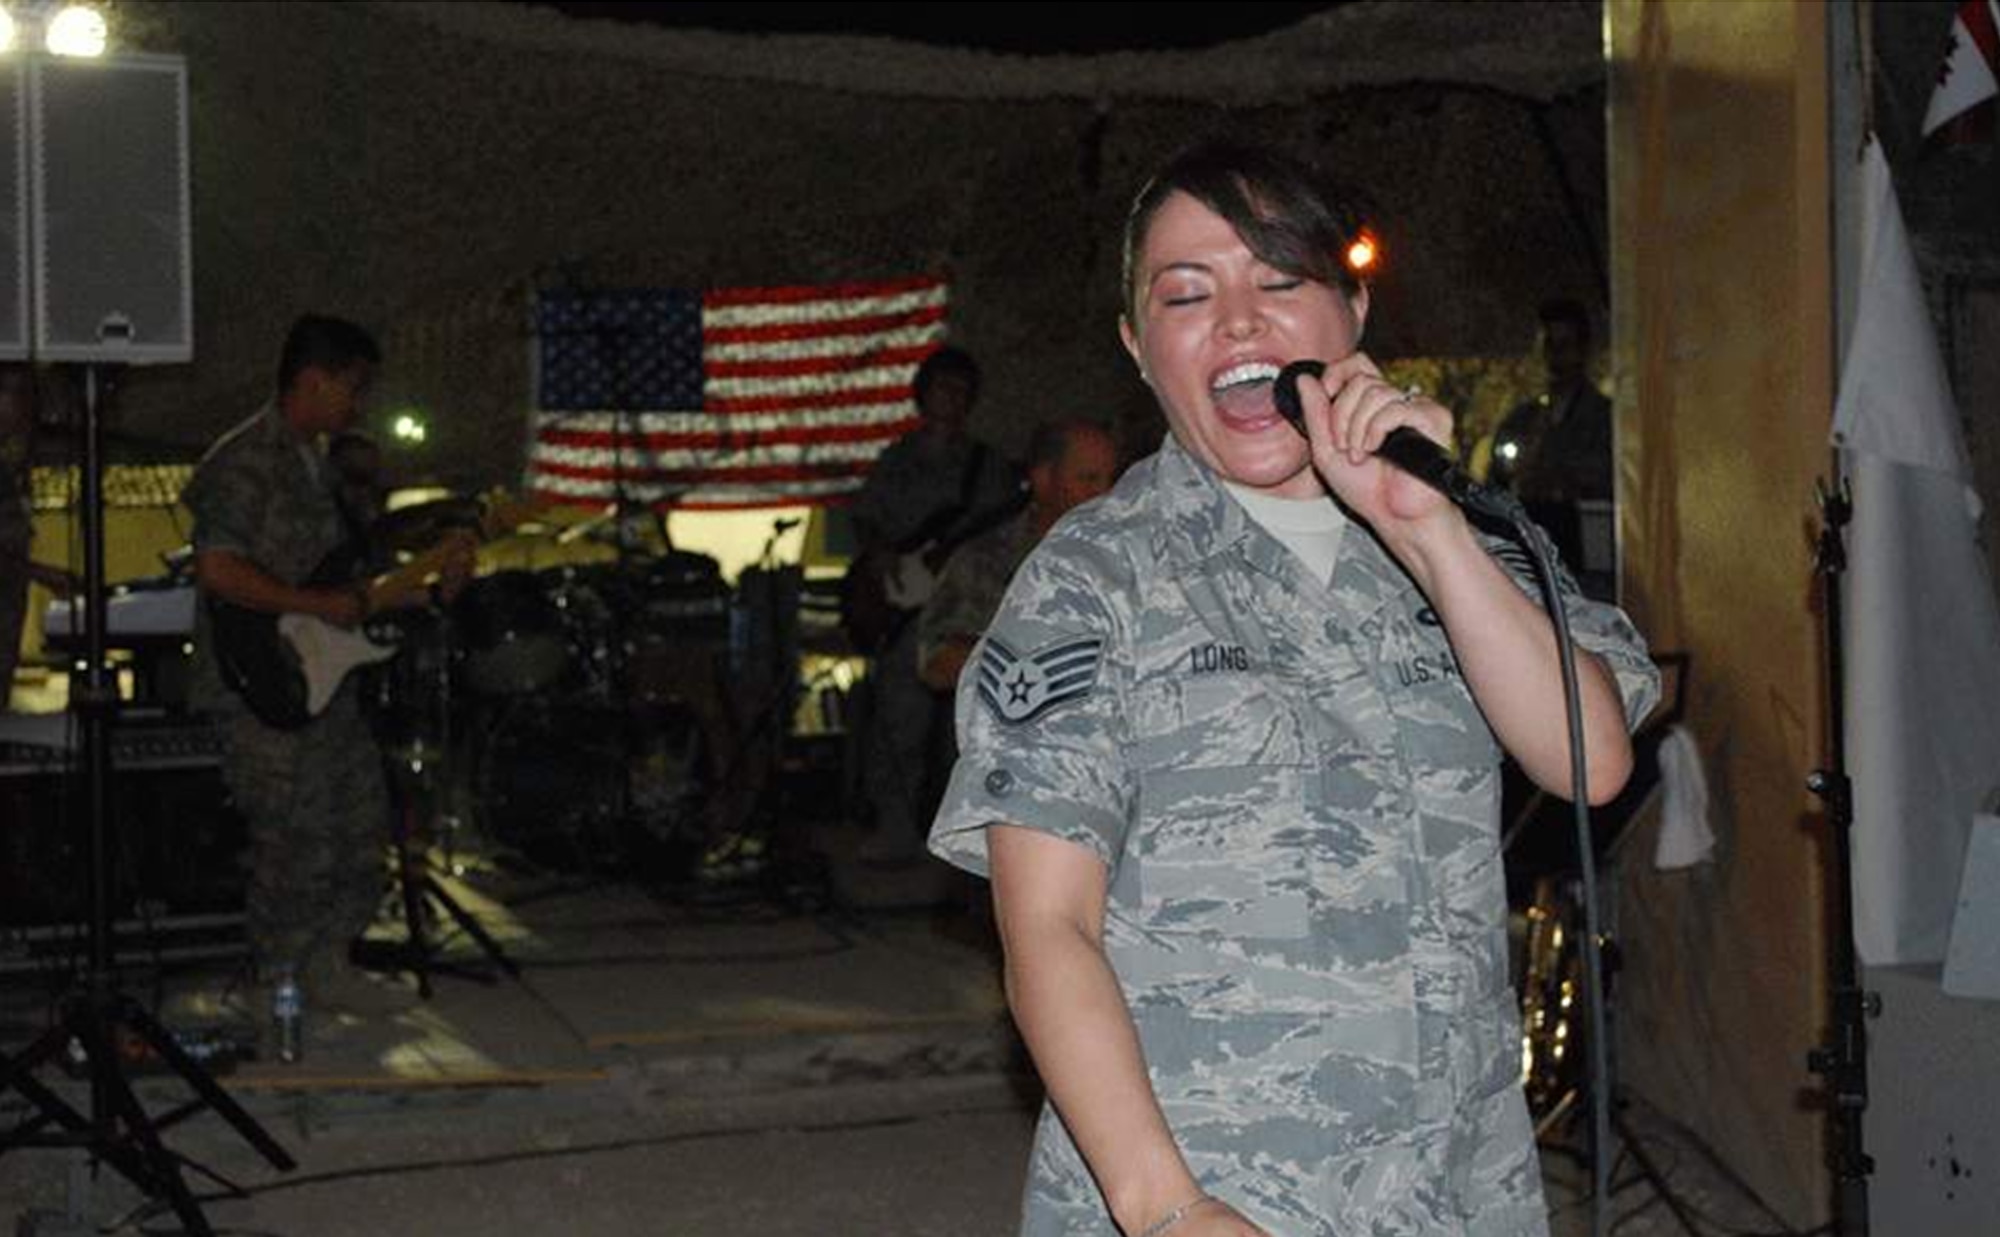 ? U.S. Air Force Staff Sgt. Angie Long  performs for U.S. and Coalition forces at a deployed location in Southwest Asia on July 7.  As the lead female vocalist of the AFCENT Band Mirage, she has performed for military personnel supporting both Operations Iraqi Freedom and Enduring Freedom.   Sergeant Long, who is deployed from the Air National Guard Band of the Central States in Missouri, hails from St. Louis. (Photo by Lt. Col. Reid Christopherson)